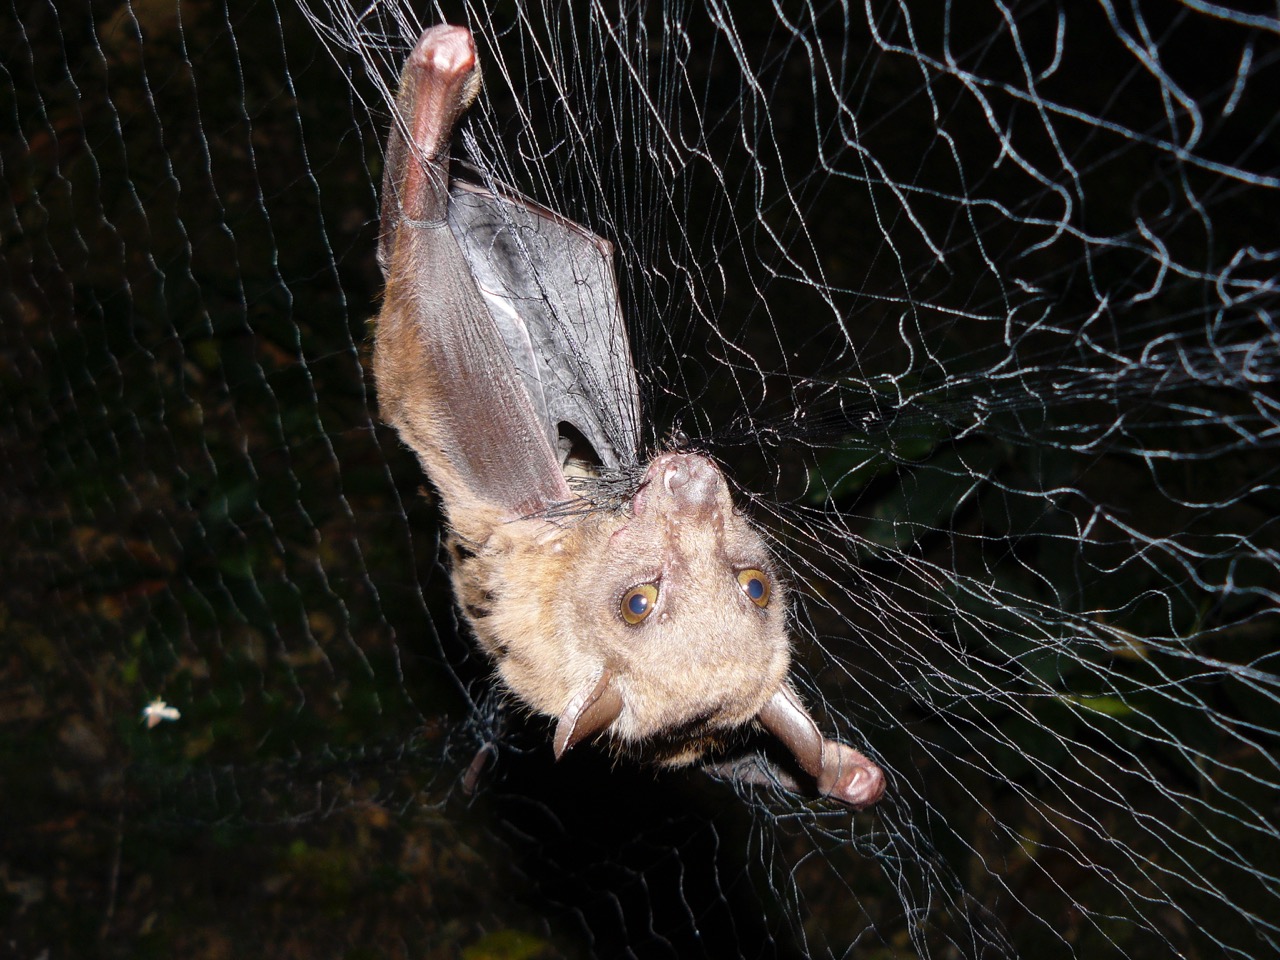 Photo of a forest bat netted in Uganda. The bat hosts a parasite – a large wingless, eyeless fly – that in turn seems to be host for a newfound virus. New work from the University of Wisconsin–Madison is helping unravel the ecological interplay of important pathogens and their hosts. After testing, the bat was released unharmed. (Courtesy Tony Goldberg)